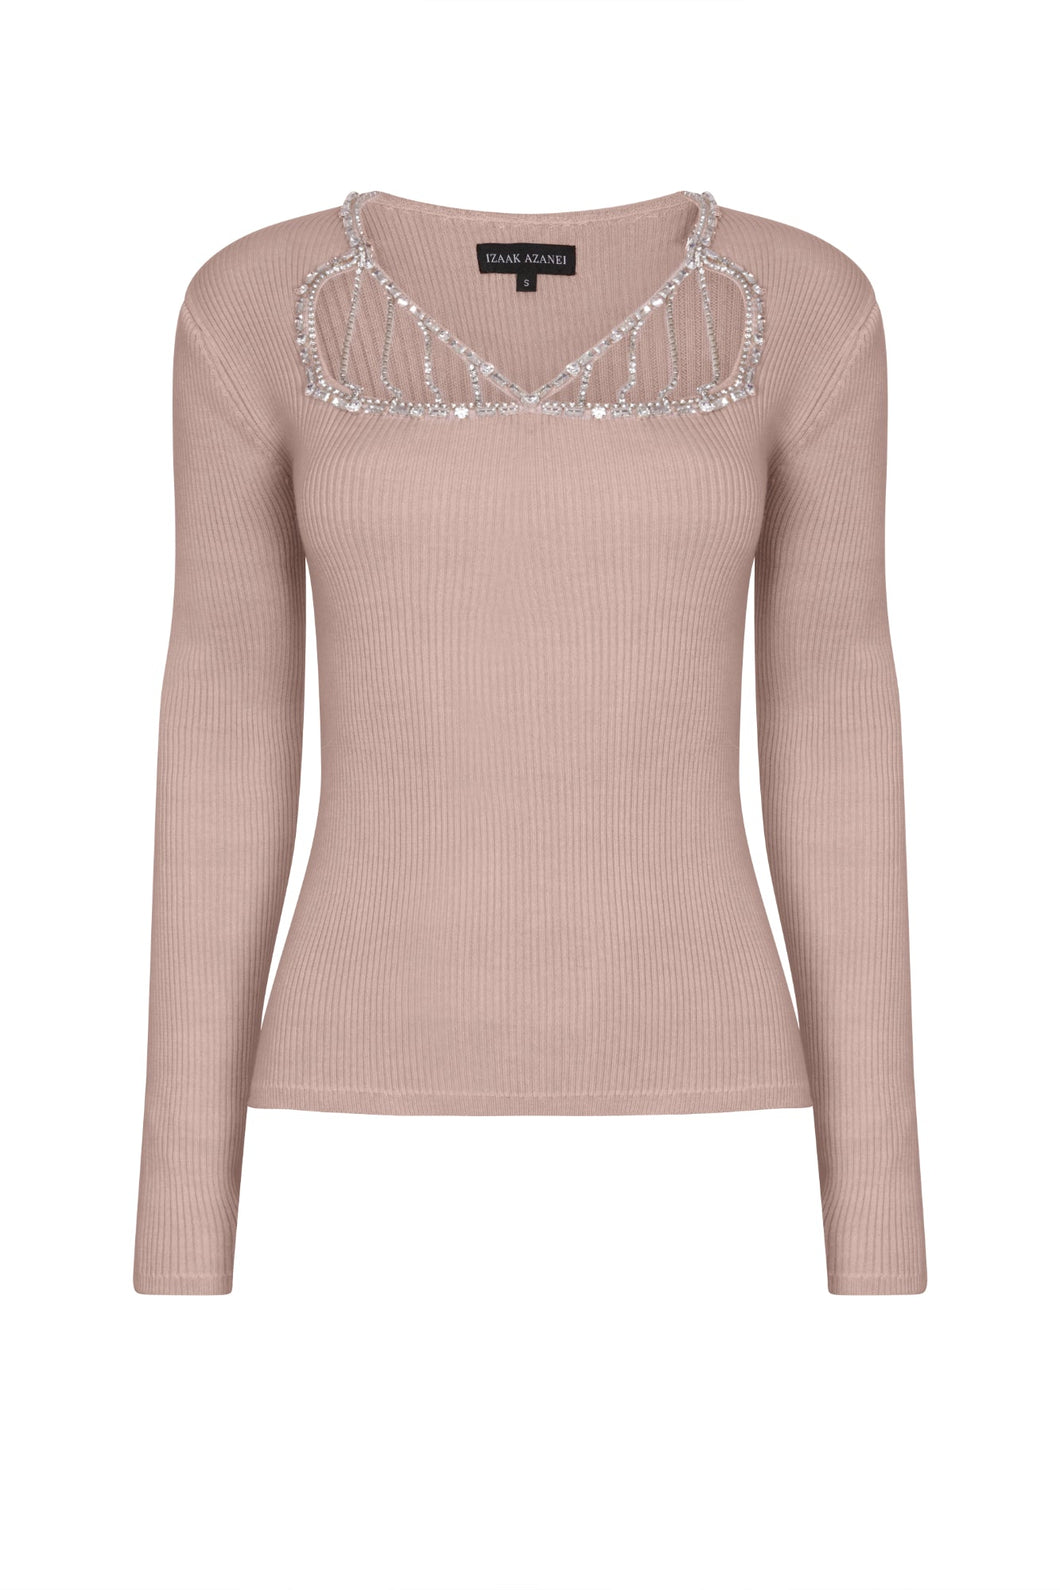 Ribbed Cut Out Embellished Top